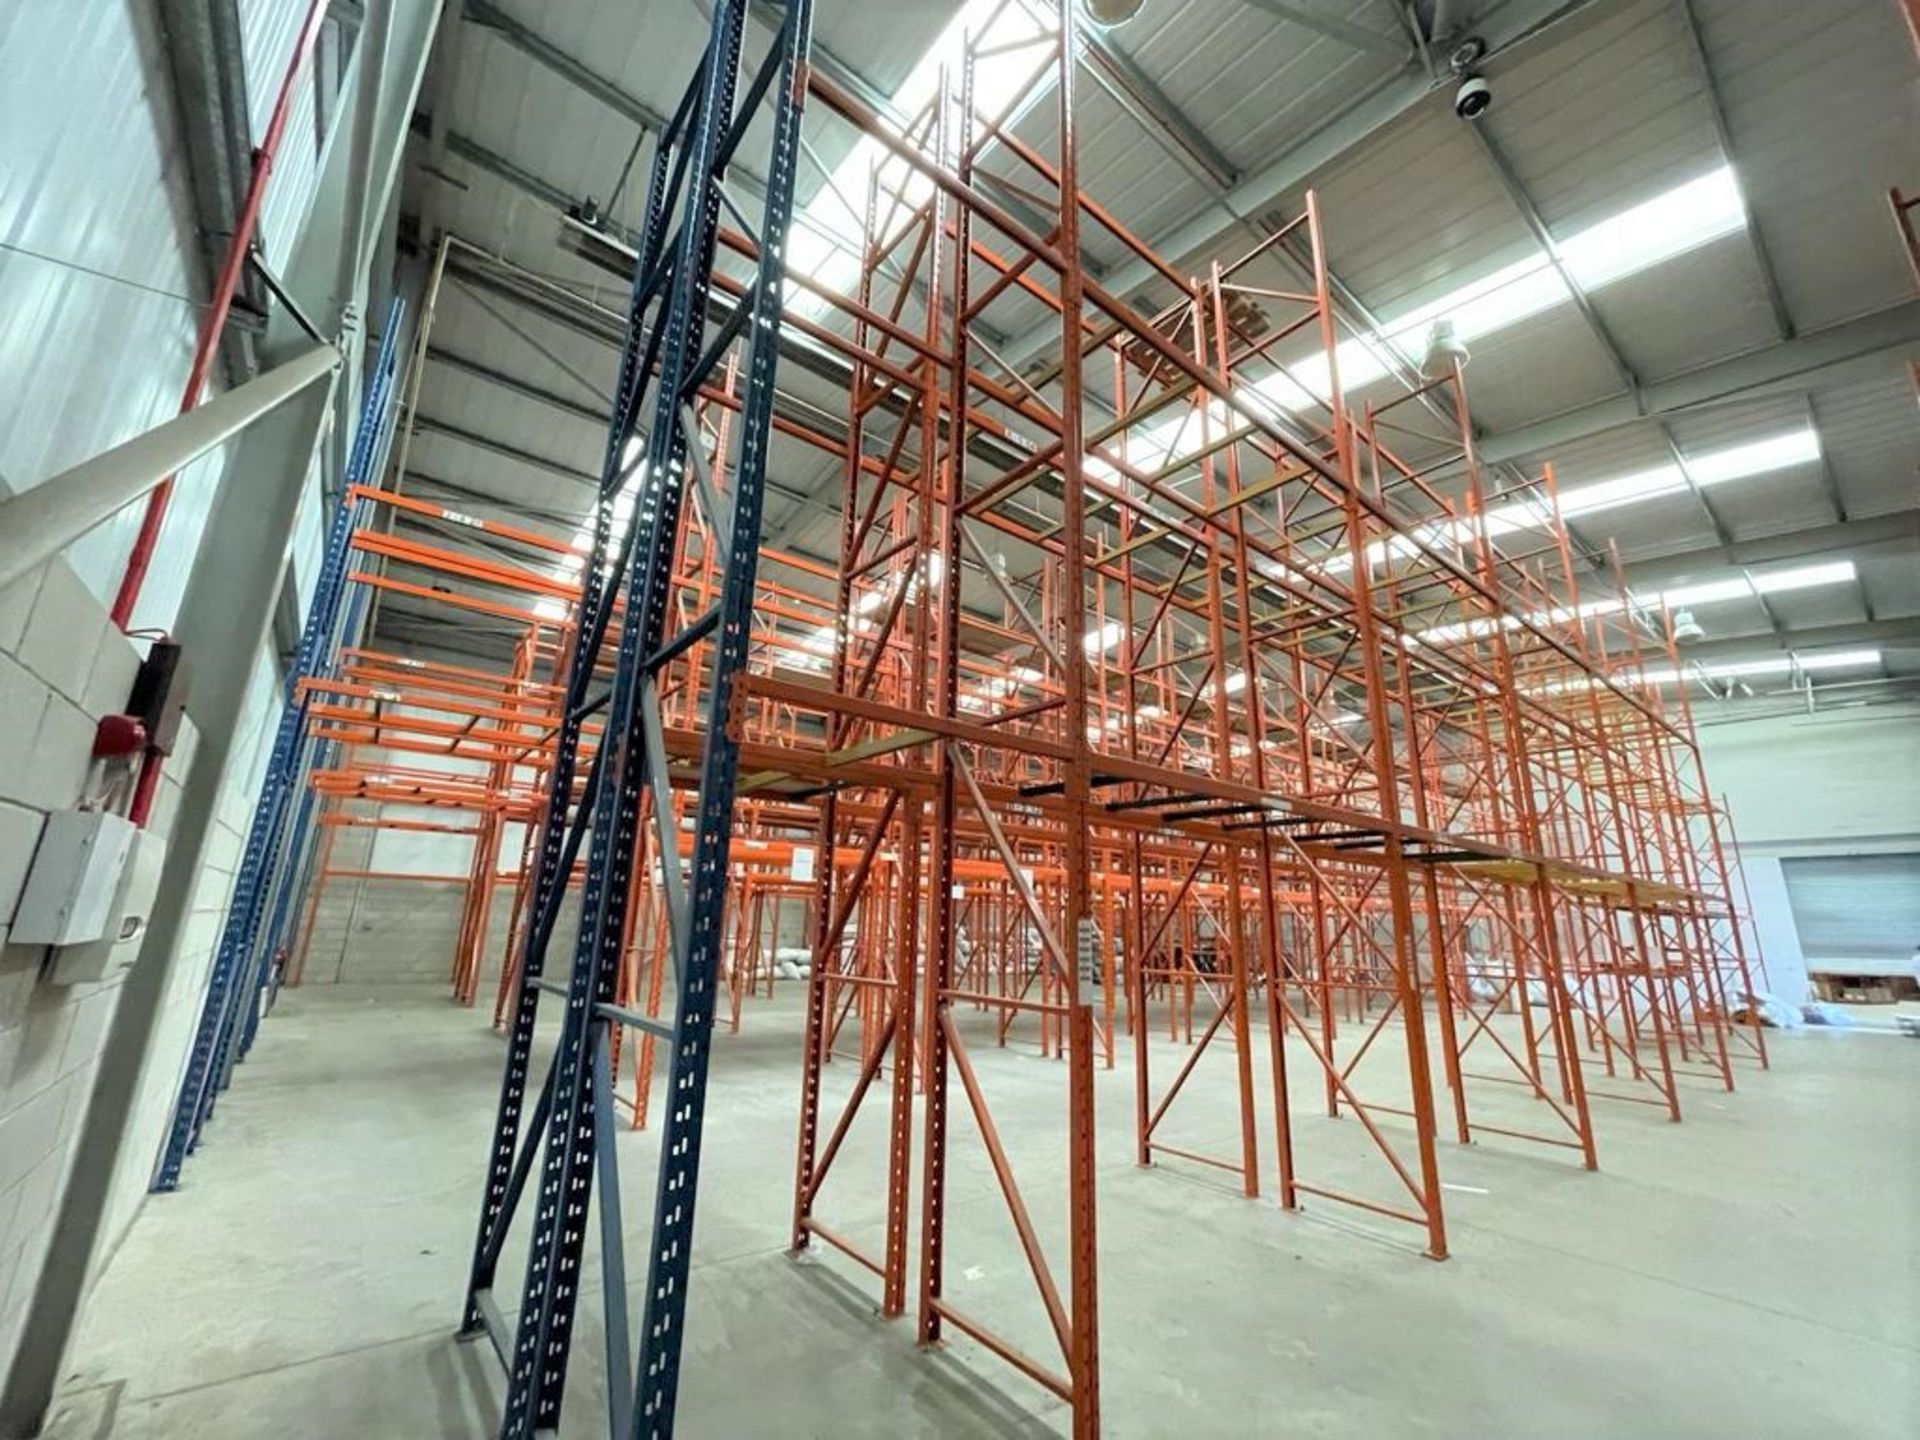 6 x Bays of RediRack Warehouse PALLET RACKING - Lot Includes 7 x Uprights and 24 x Crossbeams -